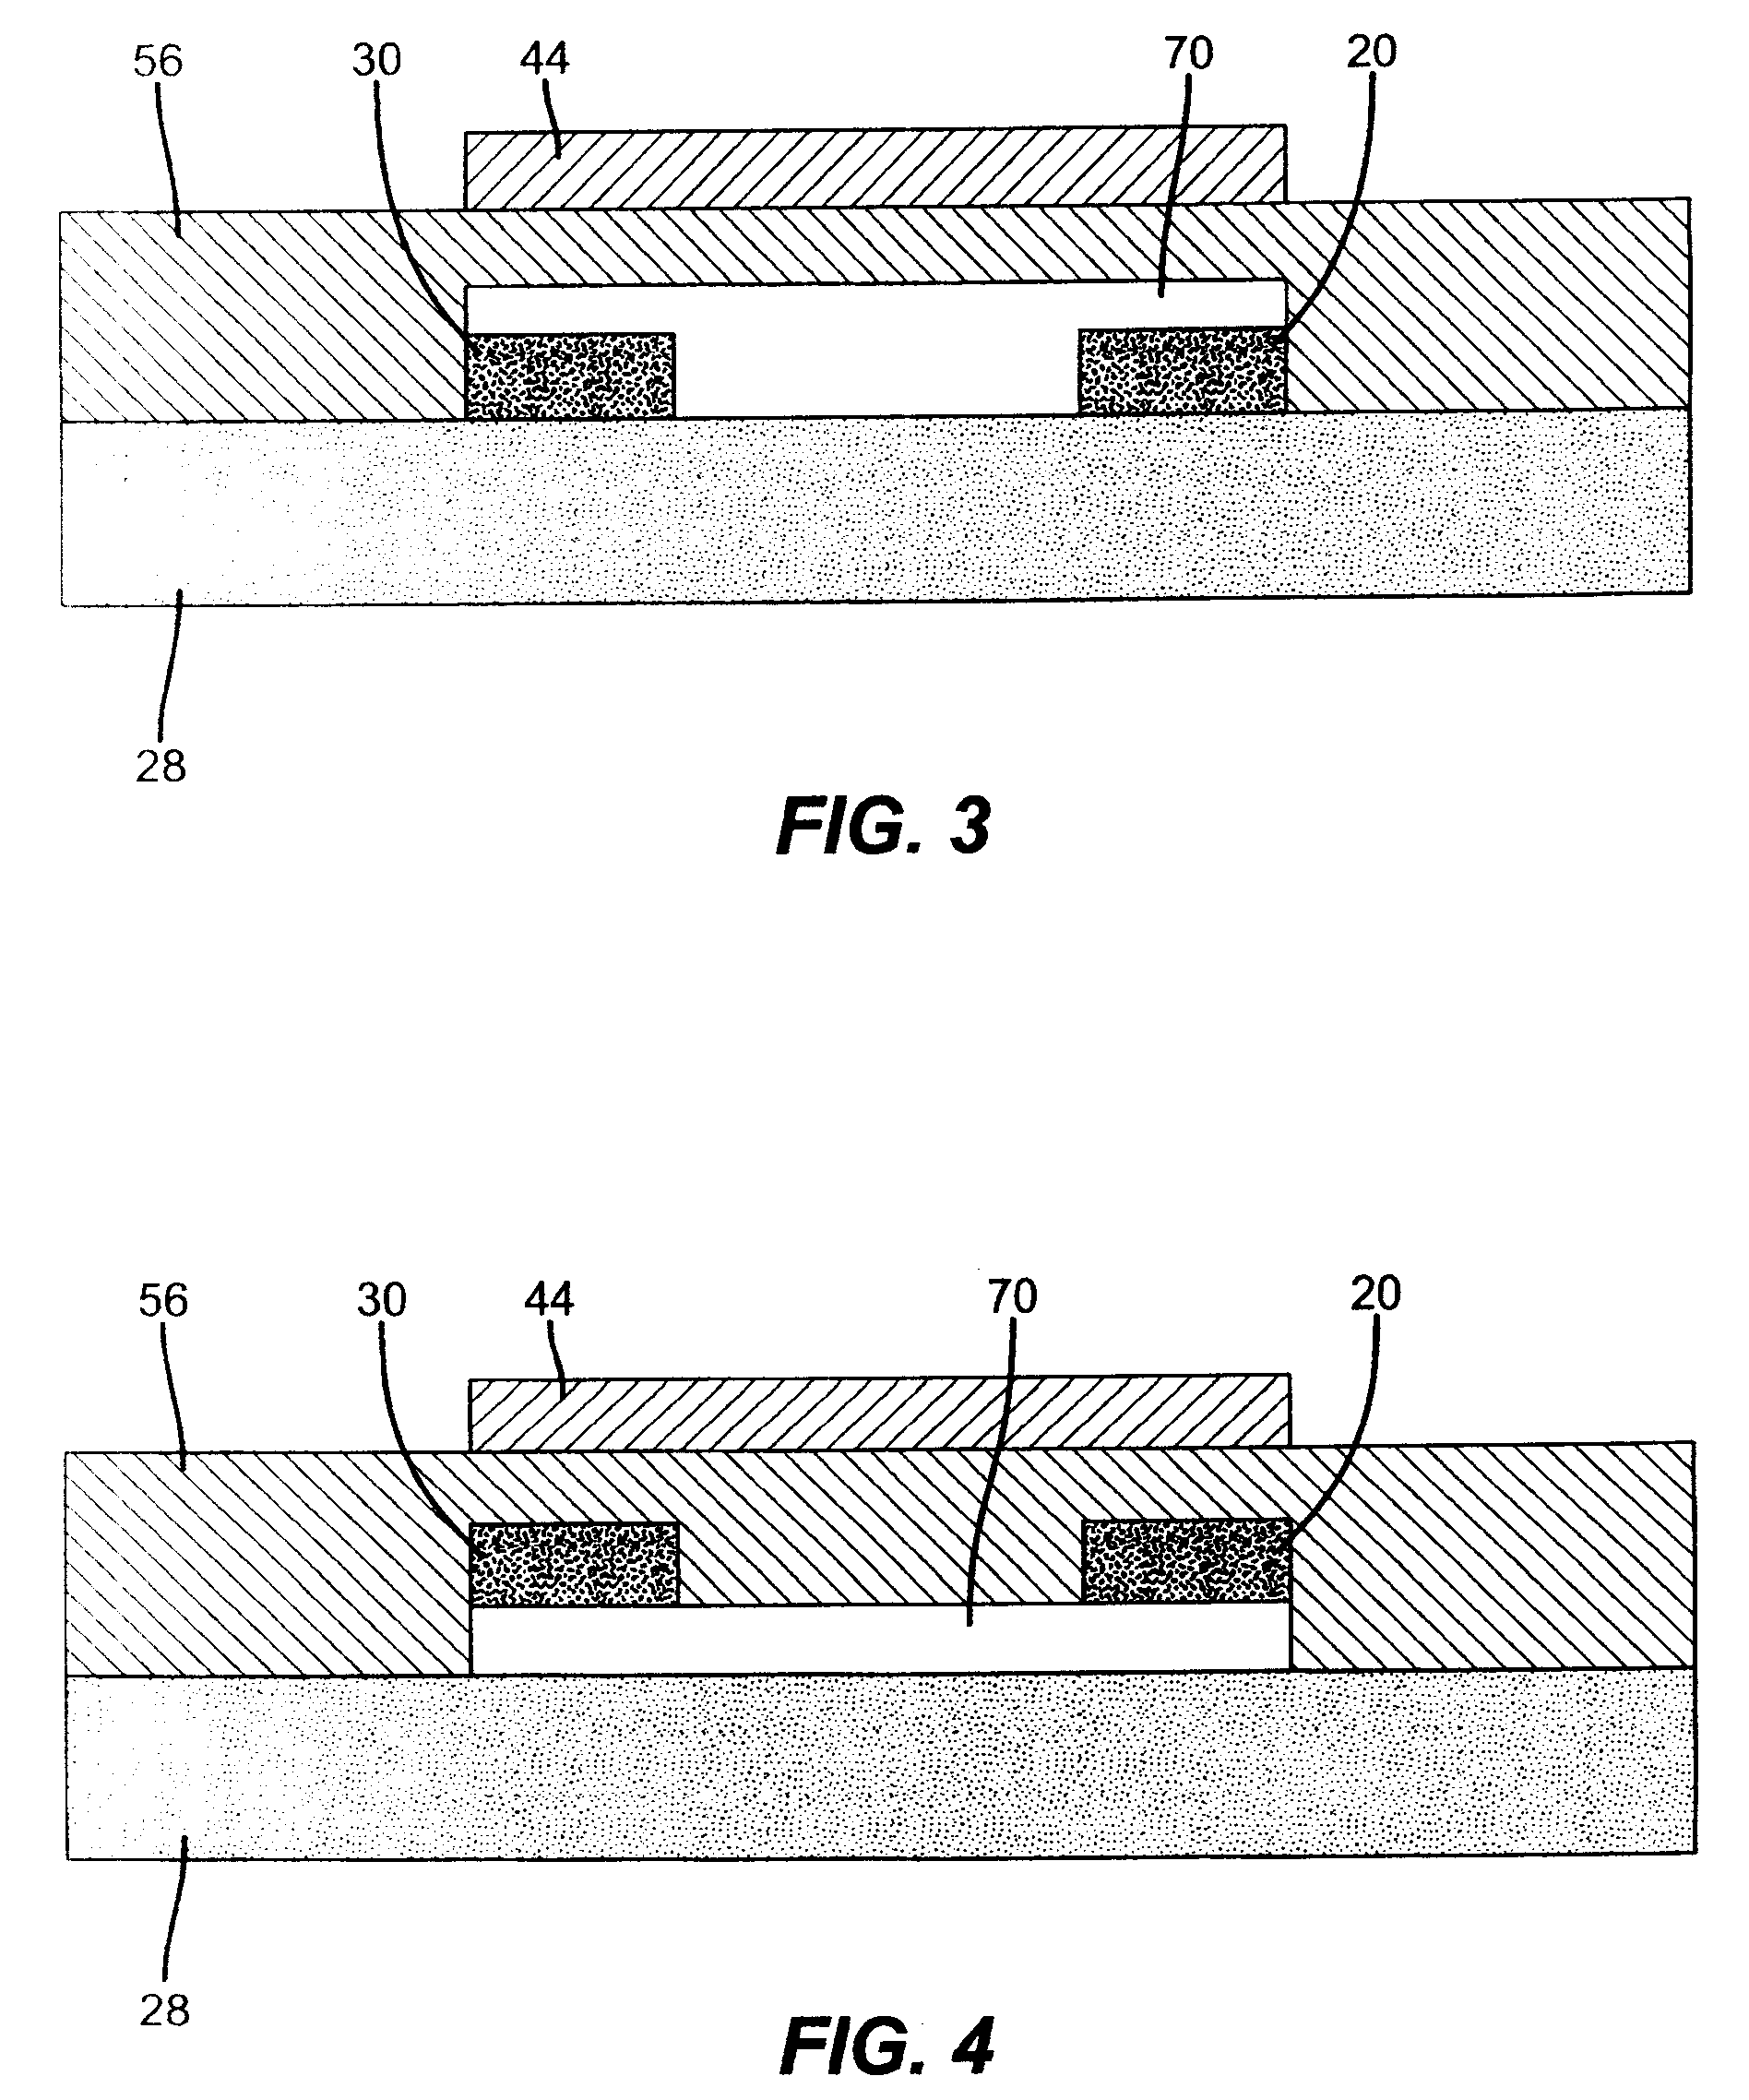 Method of making thin film transistors comprising zinc-oxide-based semiconductor materials